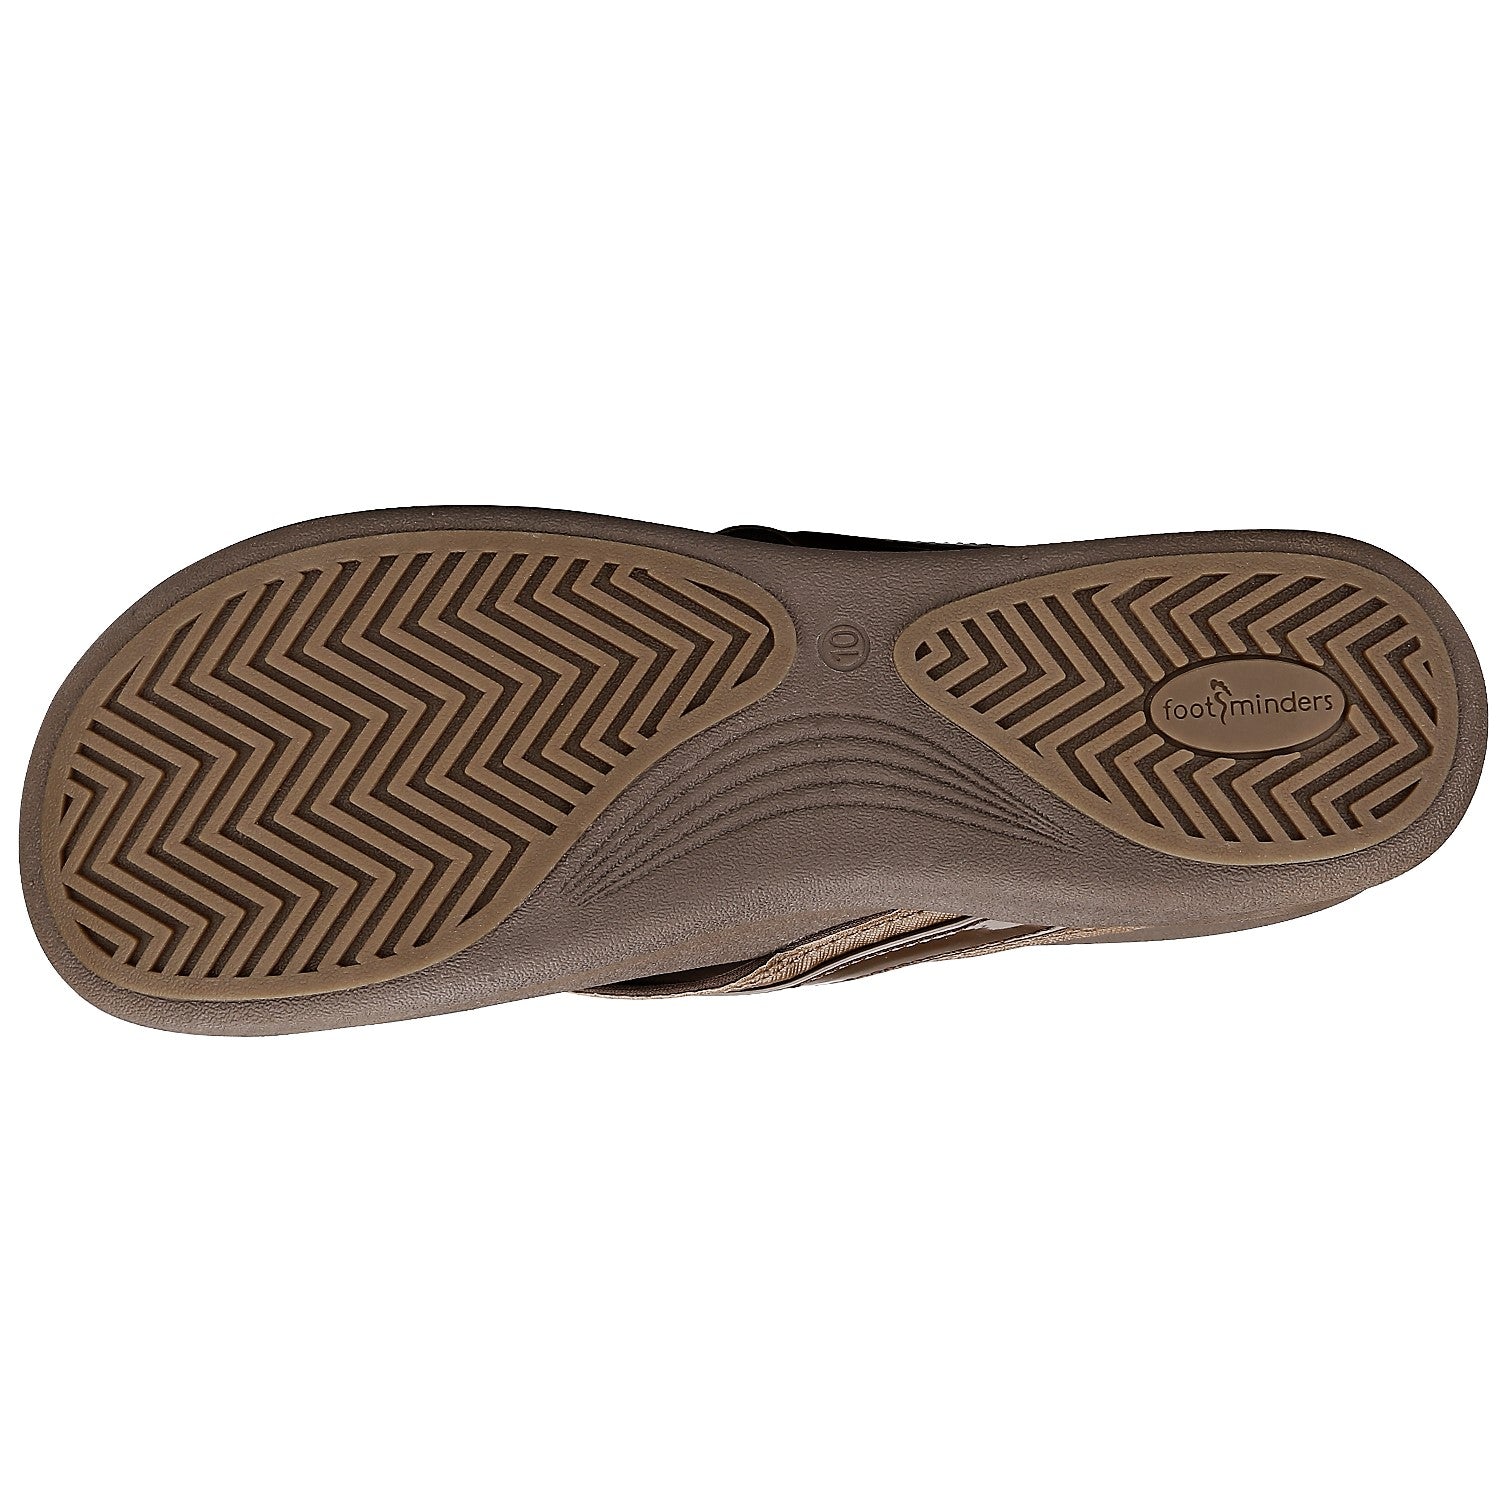 Footminders SEYMOUR Women's Orthotic Sandals Cocoa Brown